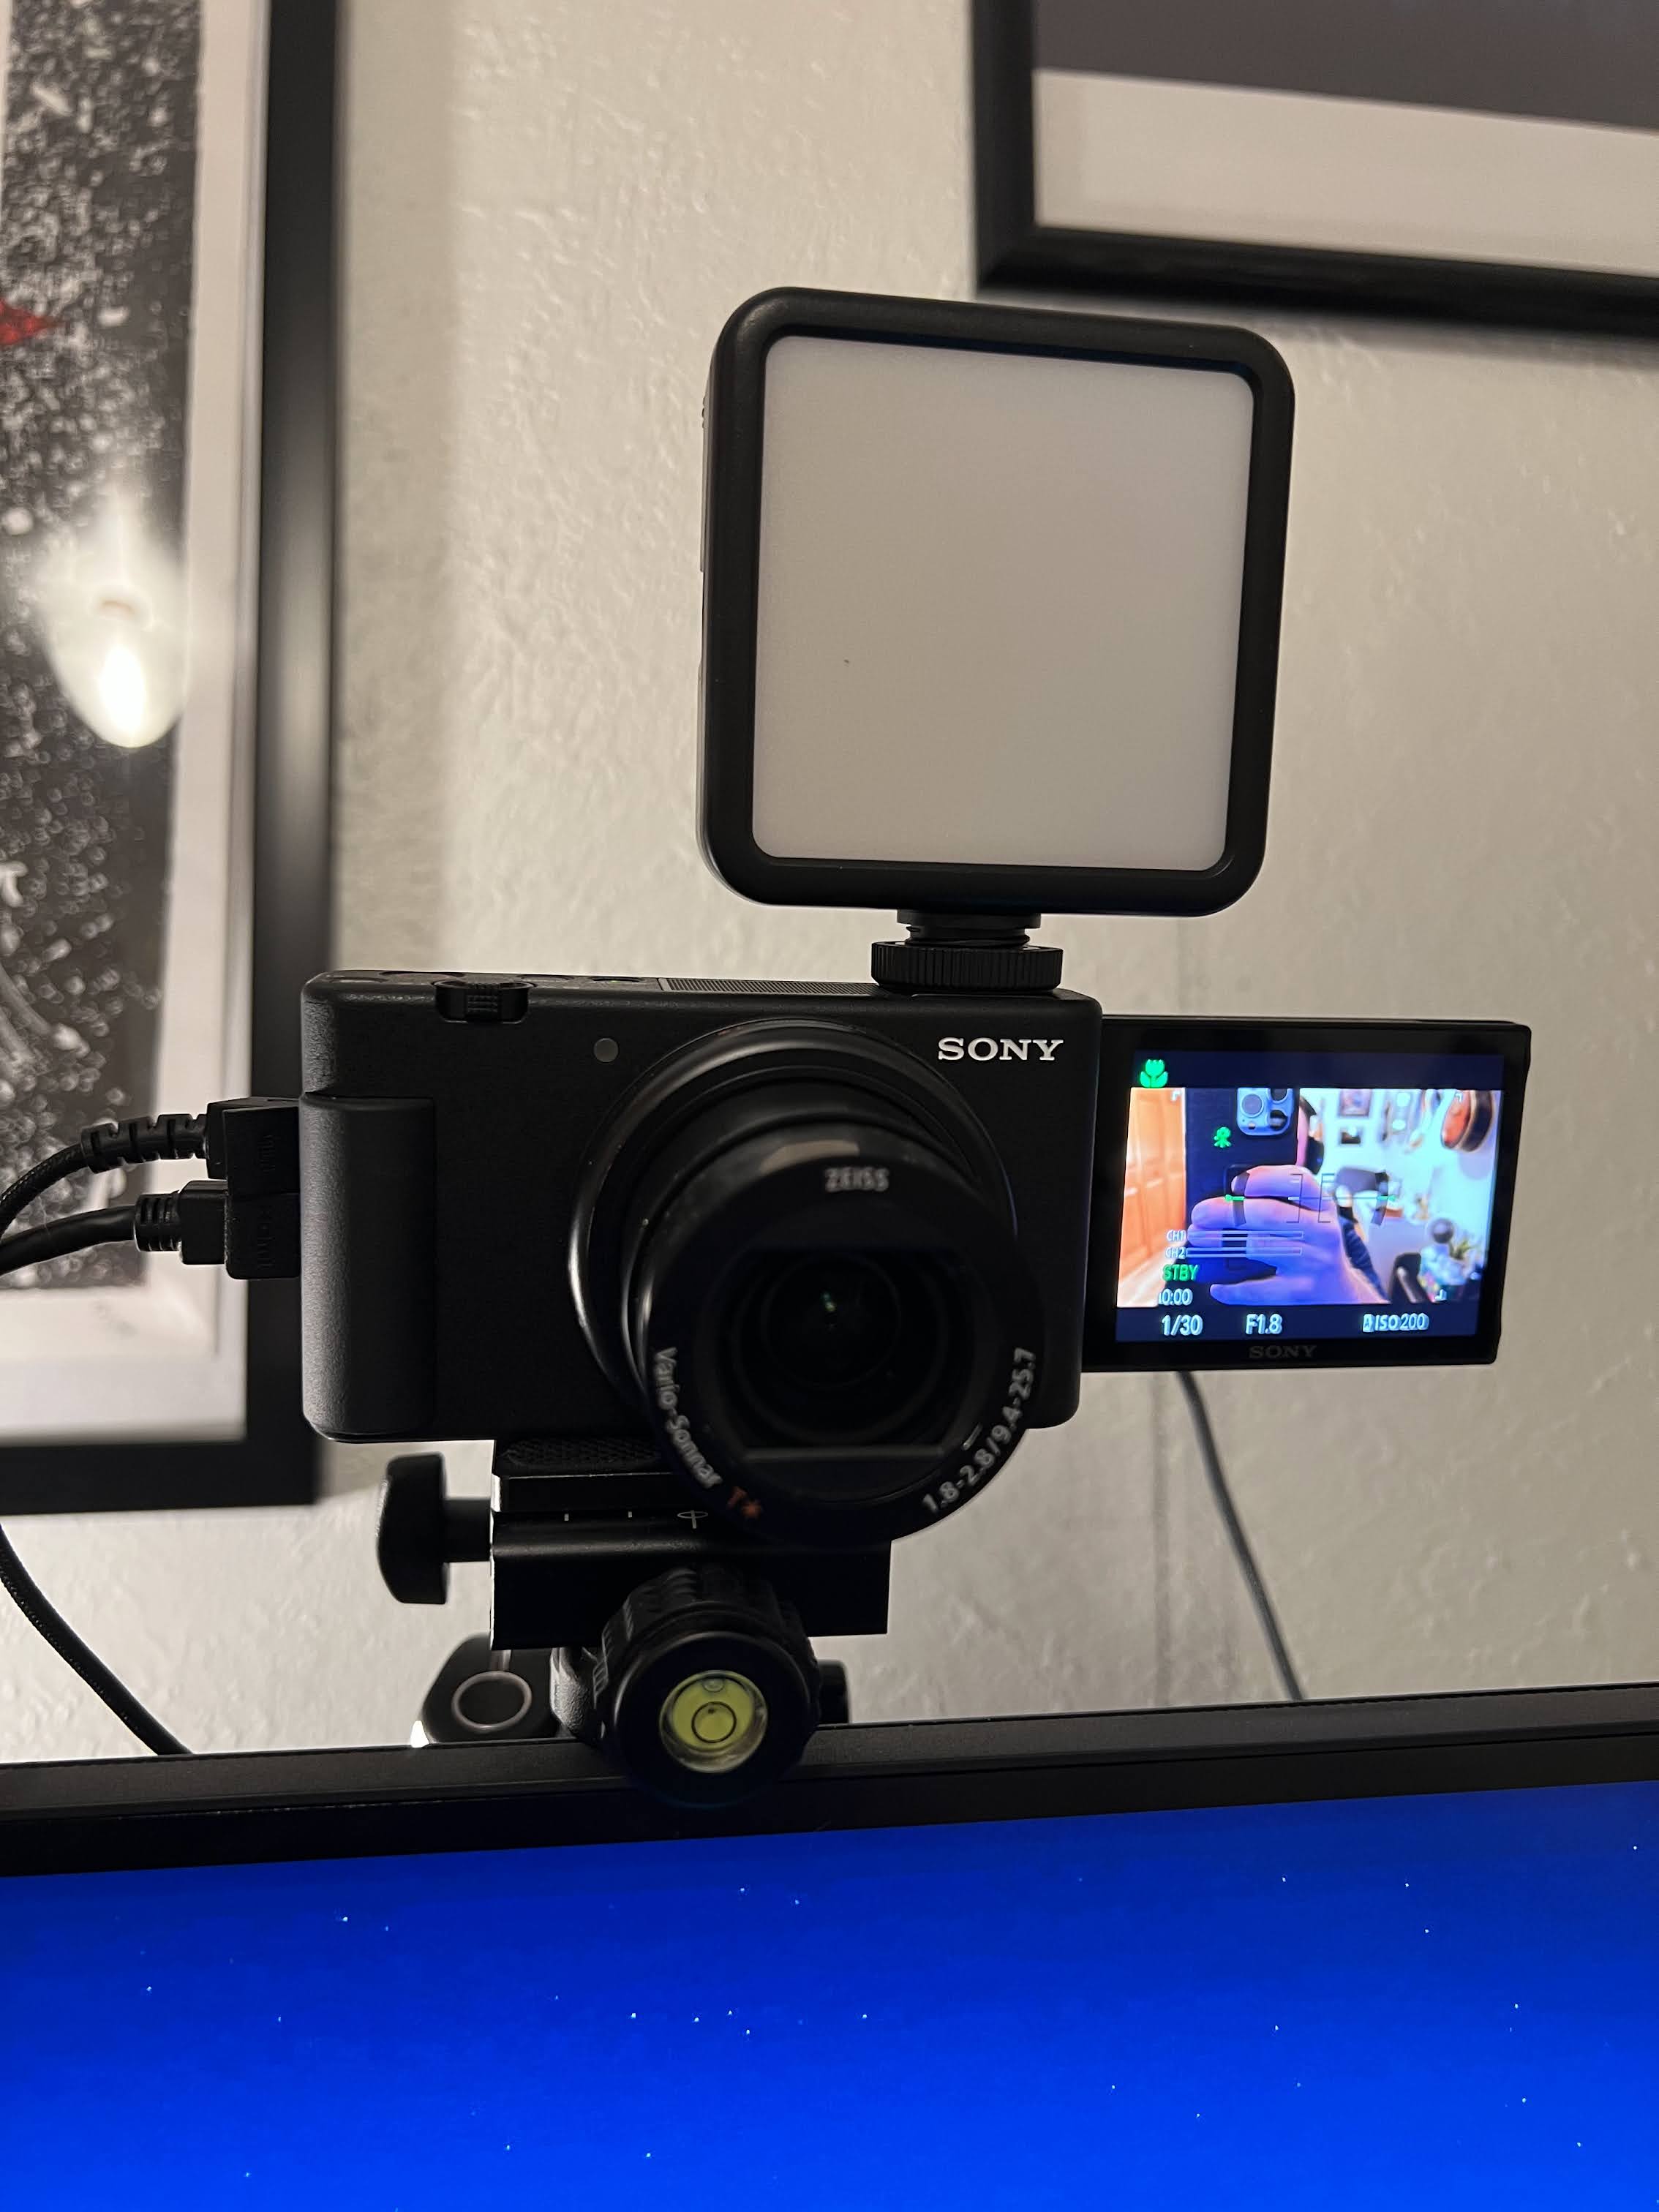 A picture of a webcam on a mount above a computer monitor.